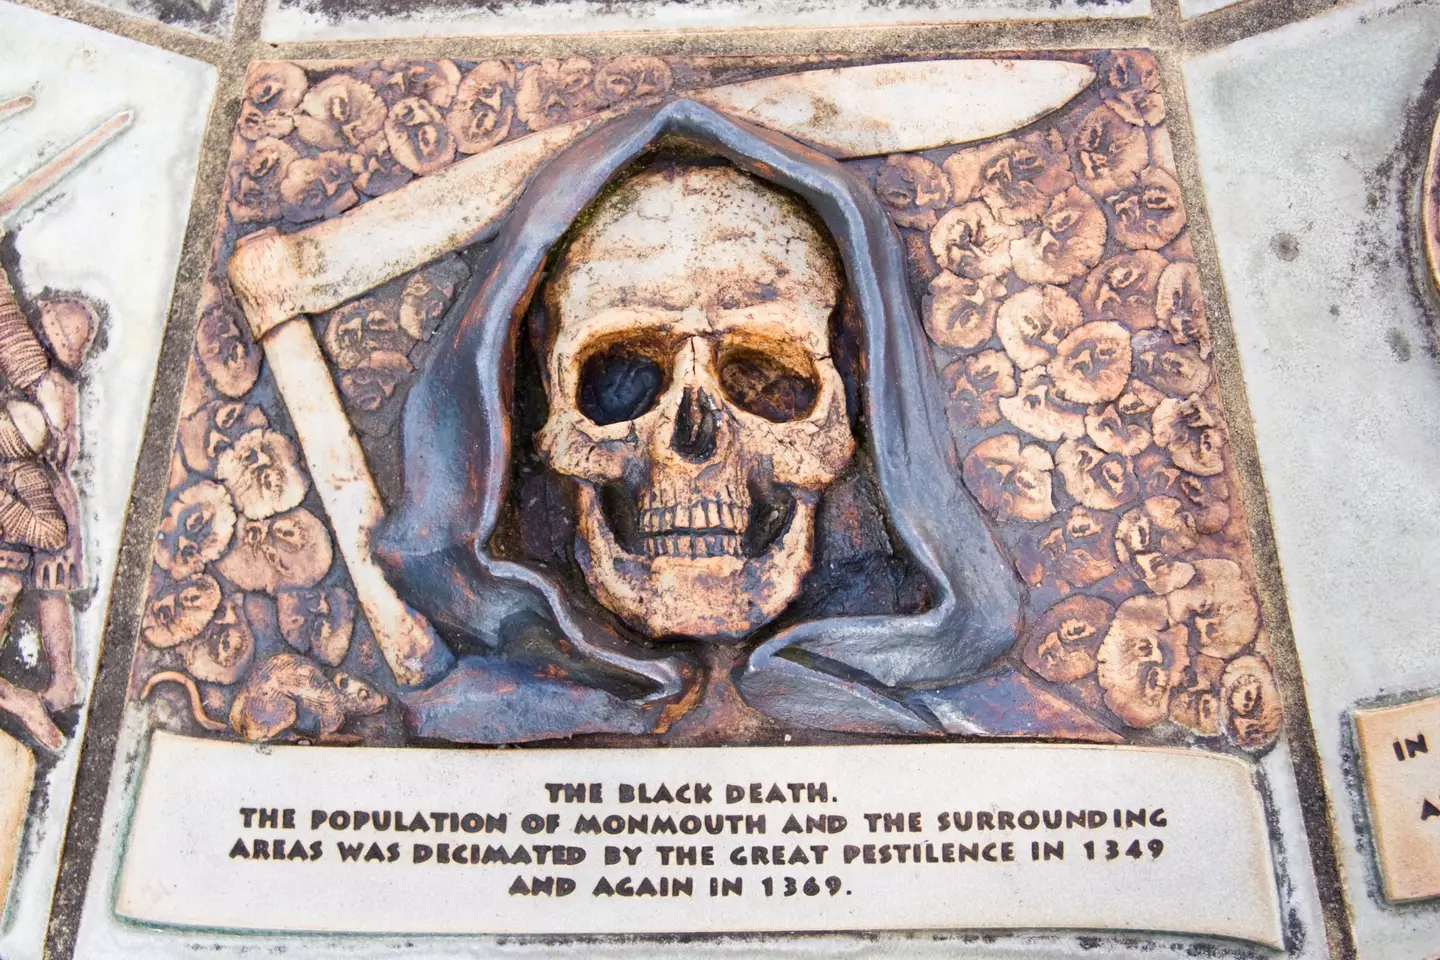 The Black Death devastated the population of the Europe in the 1300s.